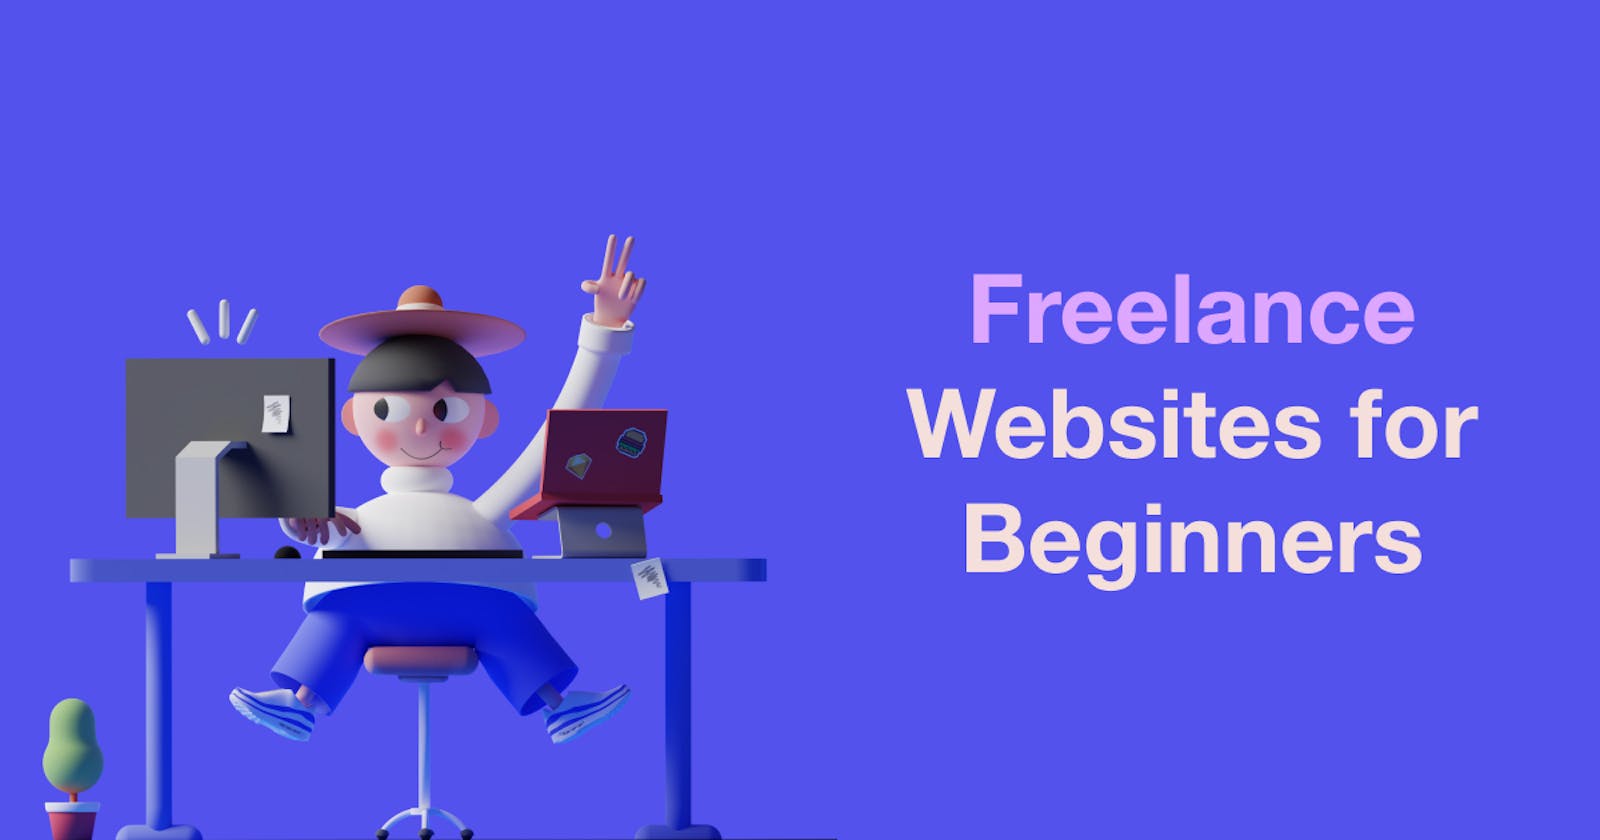 Which Website Is The Best For Freelancers?